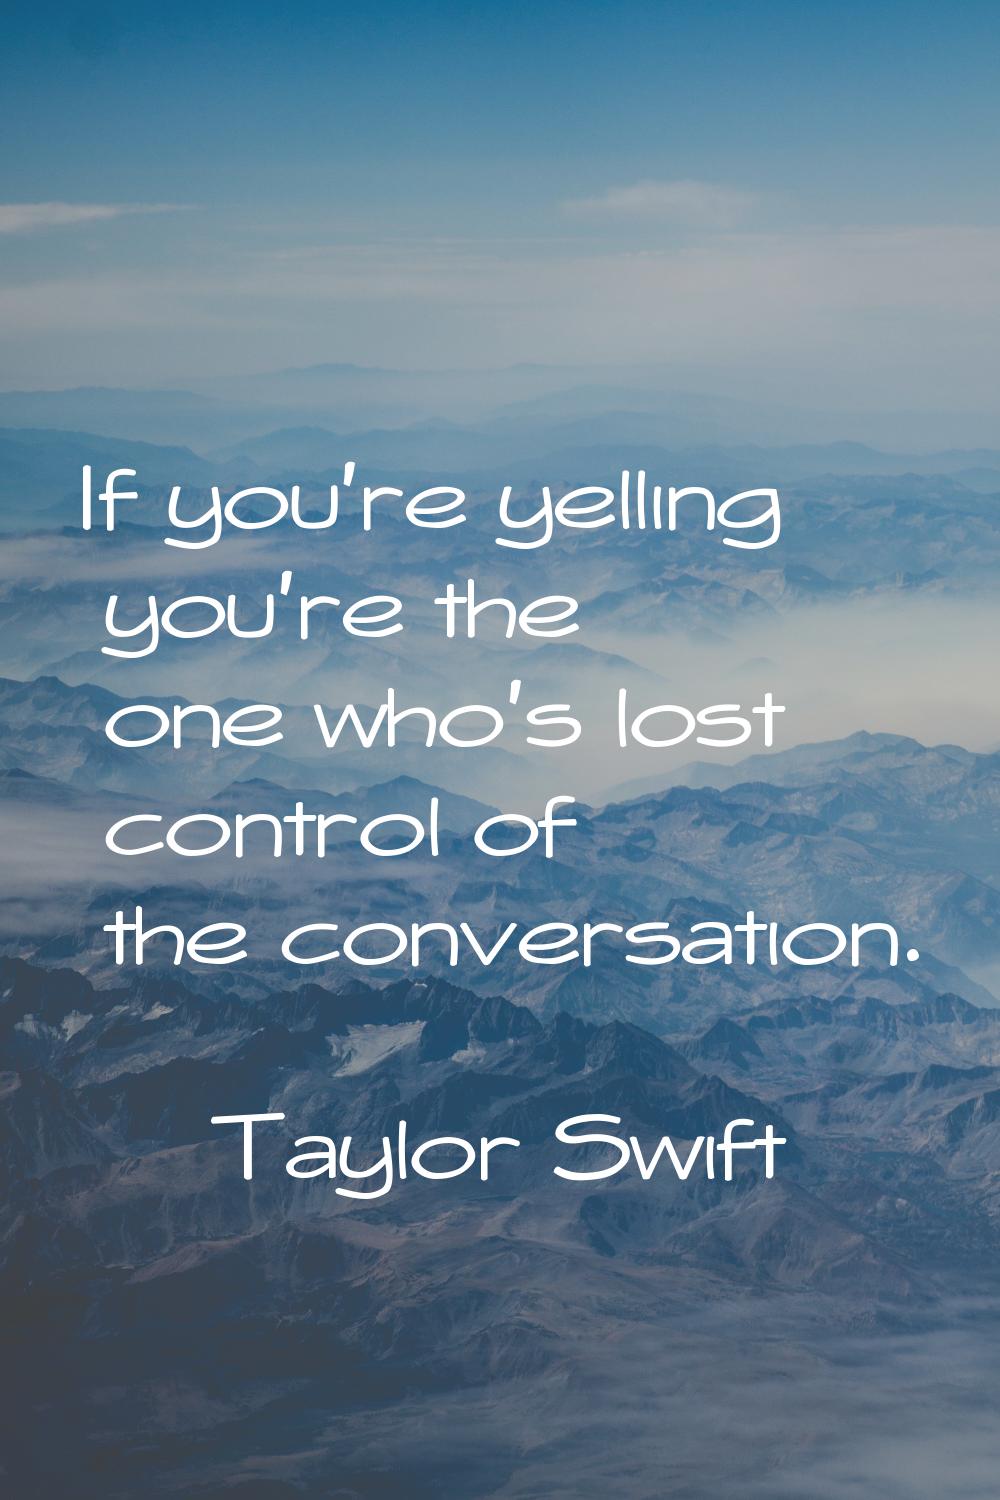 If you're yelling you're the one who's lost control of the conversation.